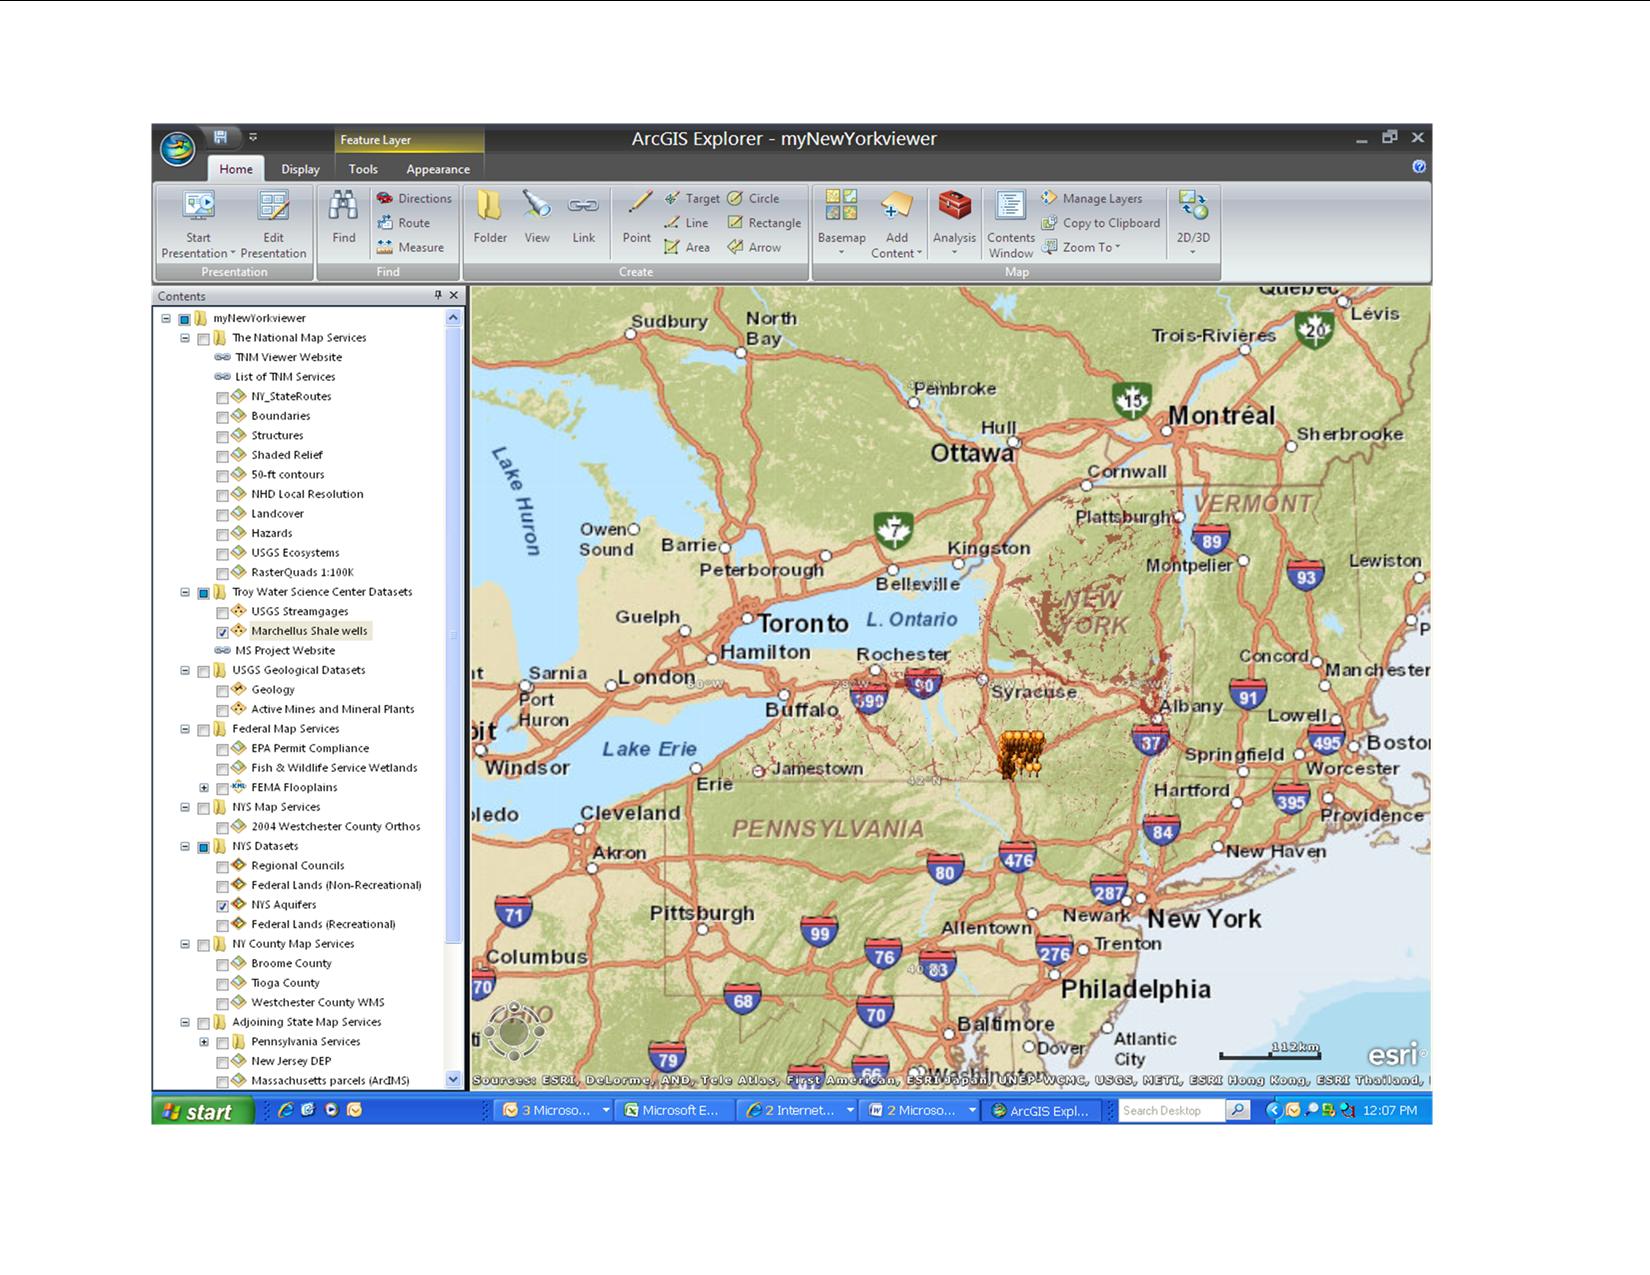 Local, Tribal, Project Case Study: WestChester County, New York, using The National Map Services in ArcGIS Explorer